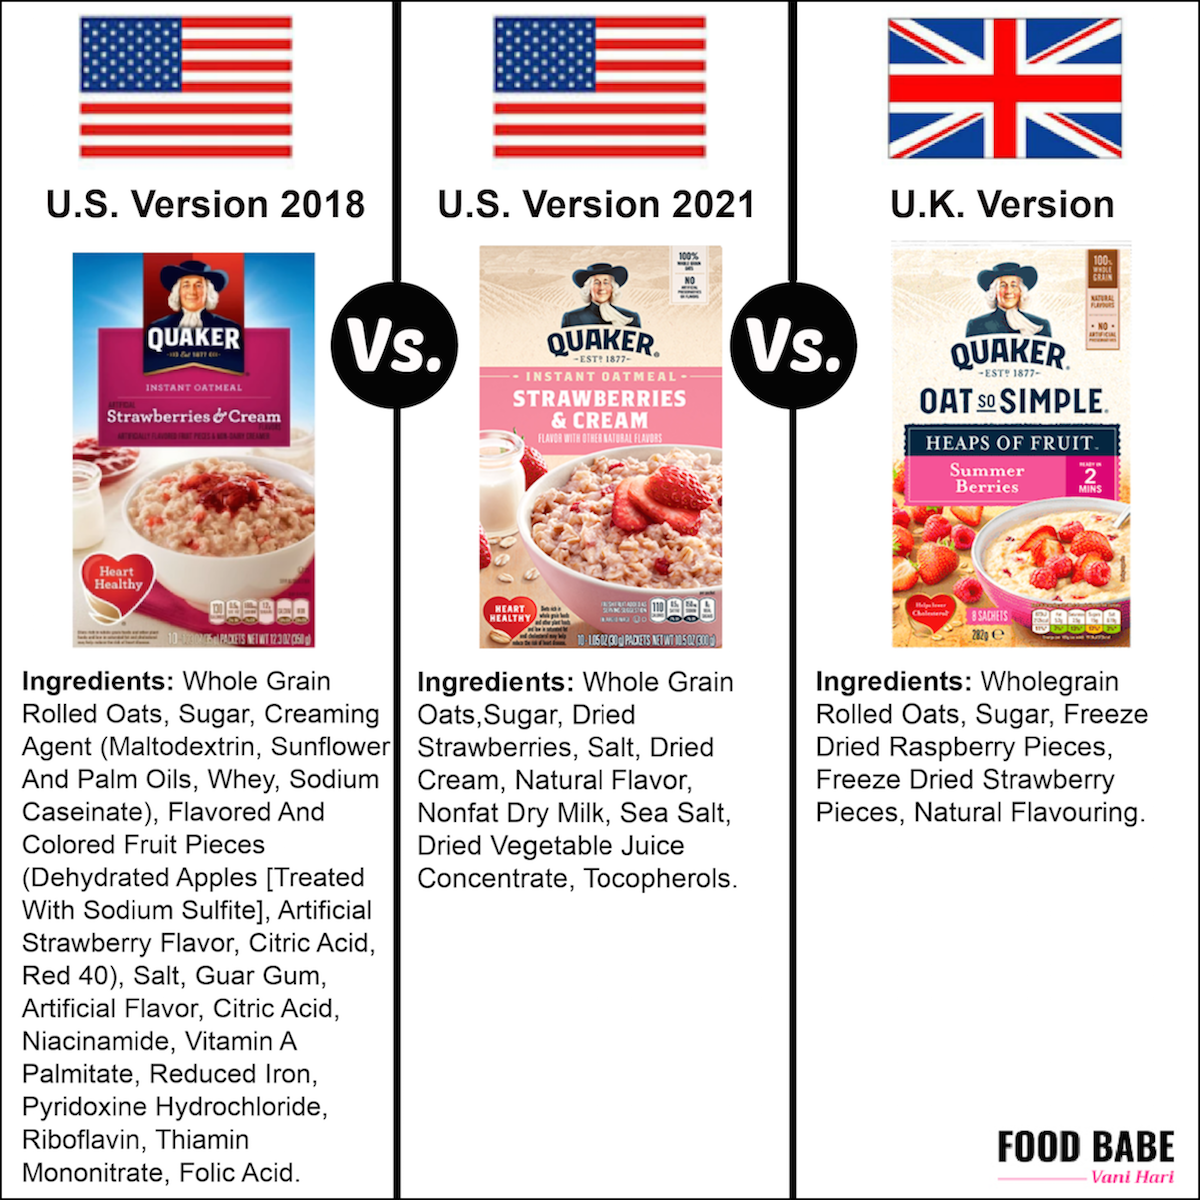 quaker-oats-changed-ingredients-1-1-1200x1200.png